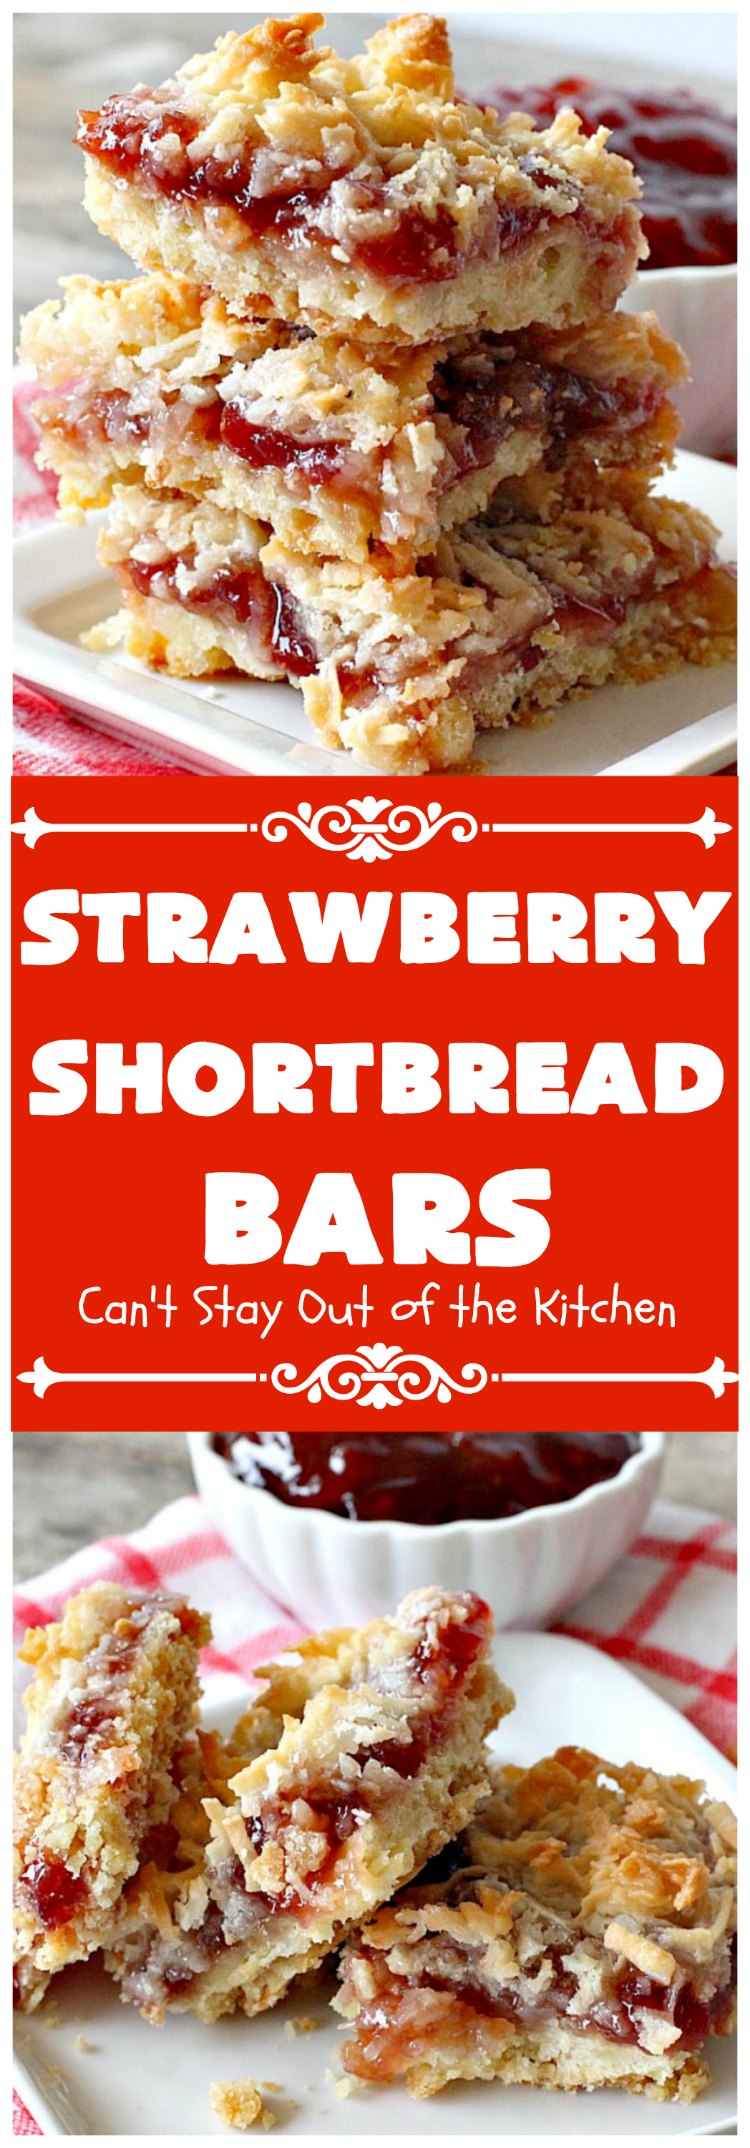 Strawberry Shortbread Bars | Can't Stay Out of the Kitchen